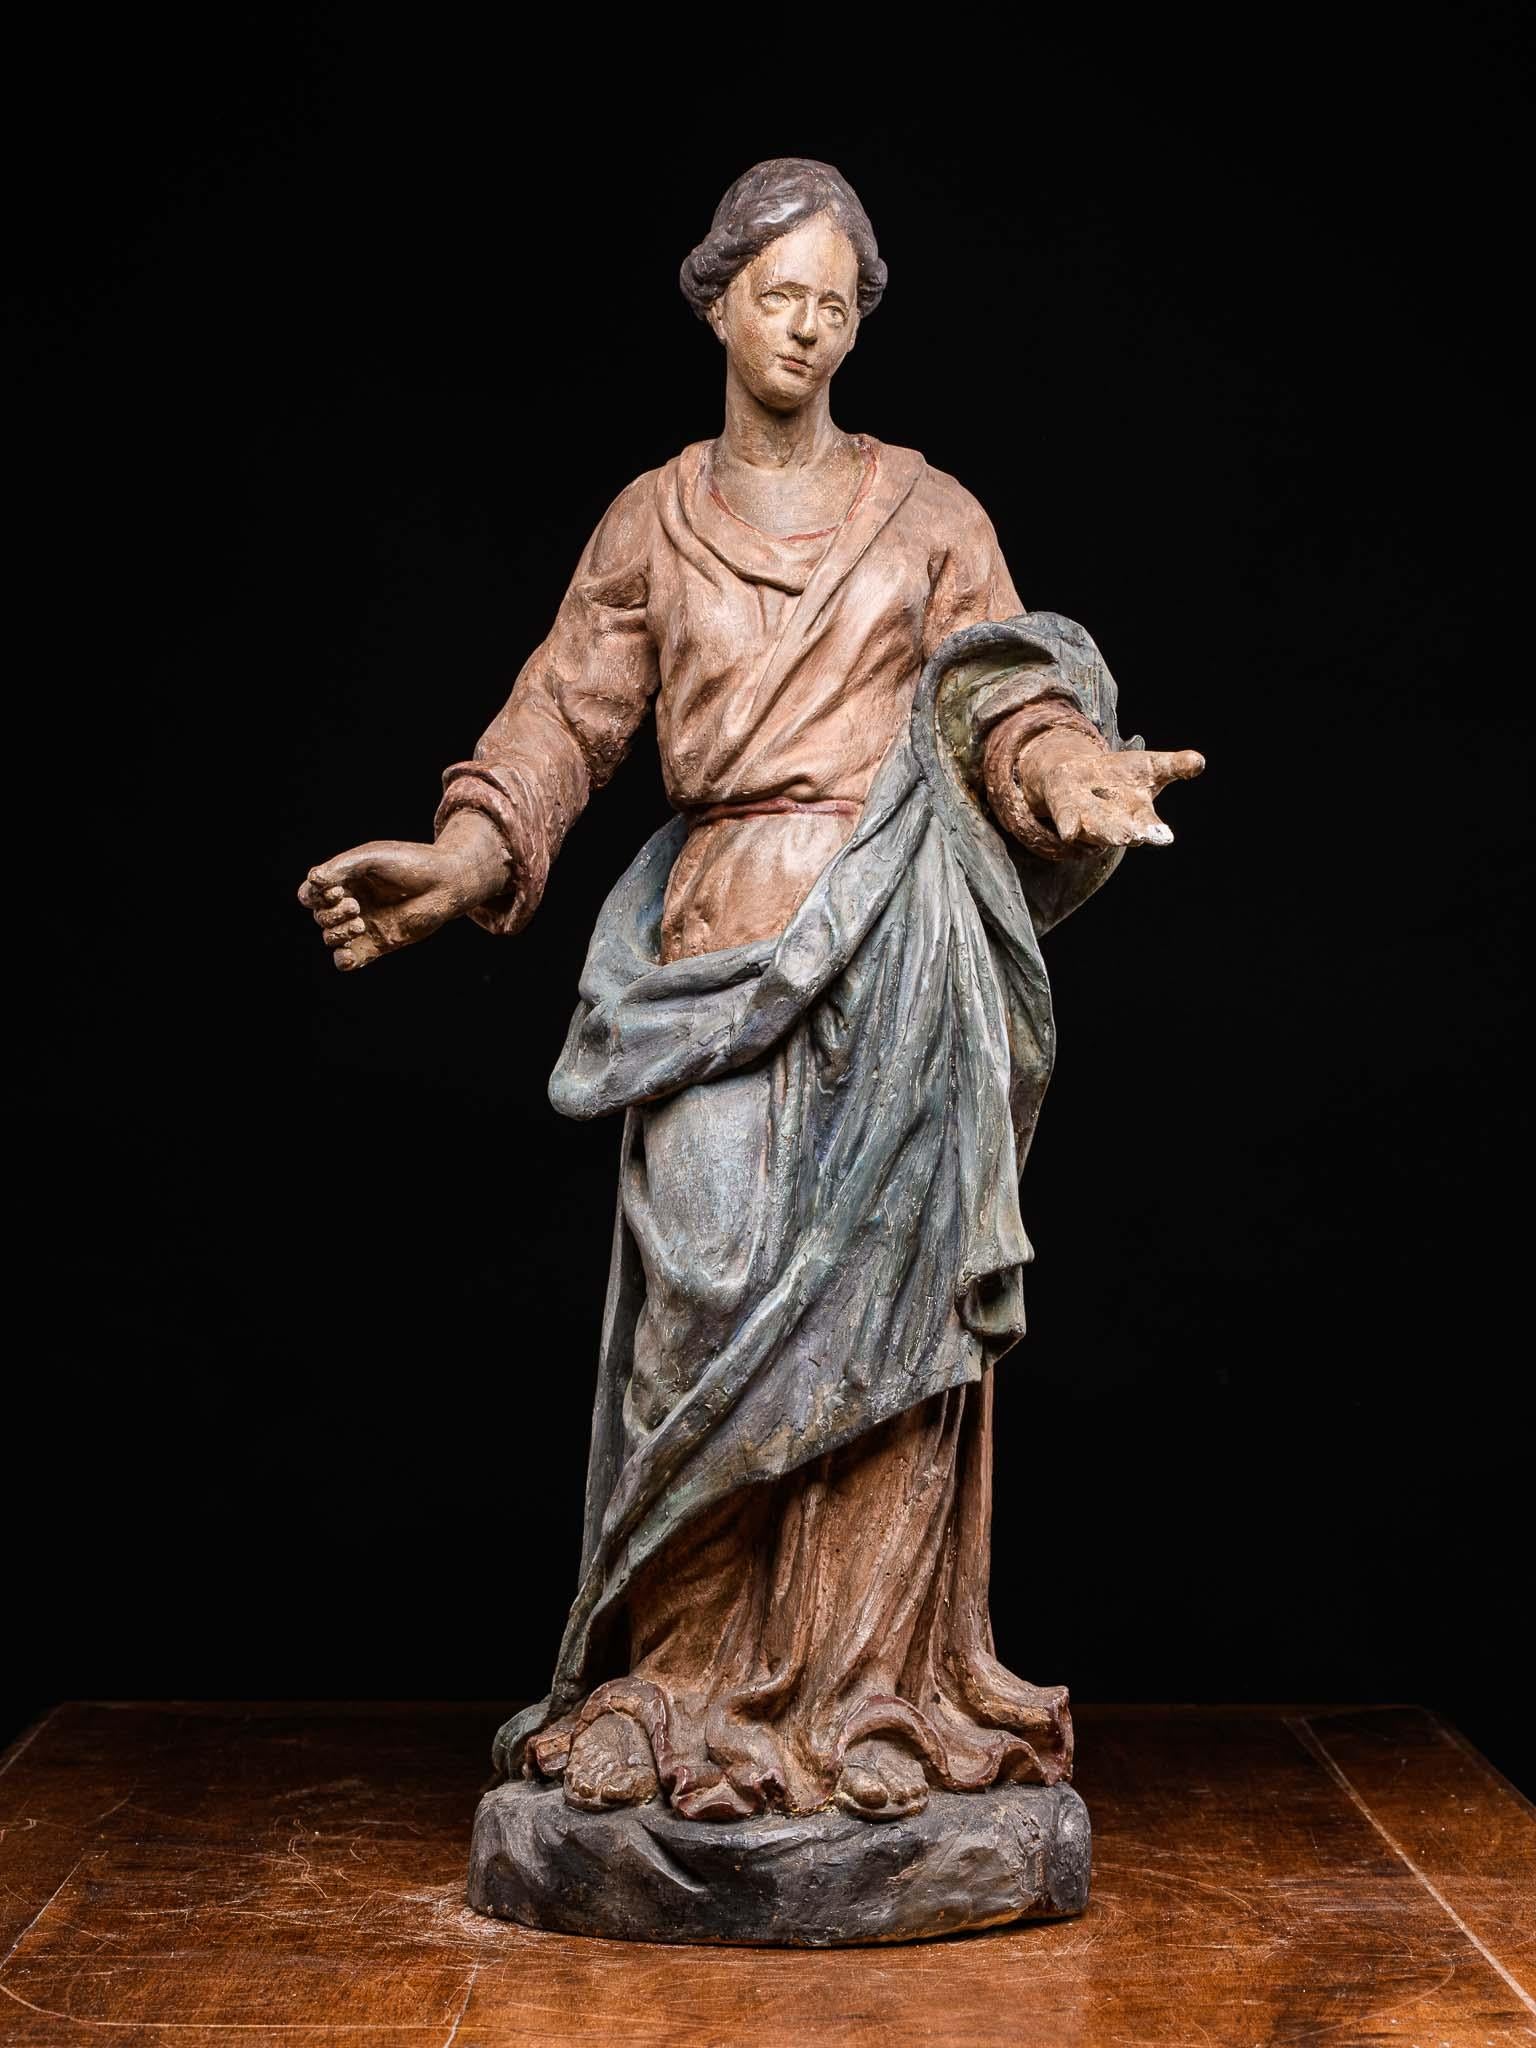 An exceptionally beautiful antique French wood carving, made in the 17th century. It depicts Madonna standing with open offering arms .The contemplative oval face, the finely carved hairdo and intricate arrangement of the pleats of her dress lend